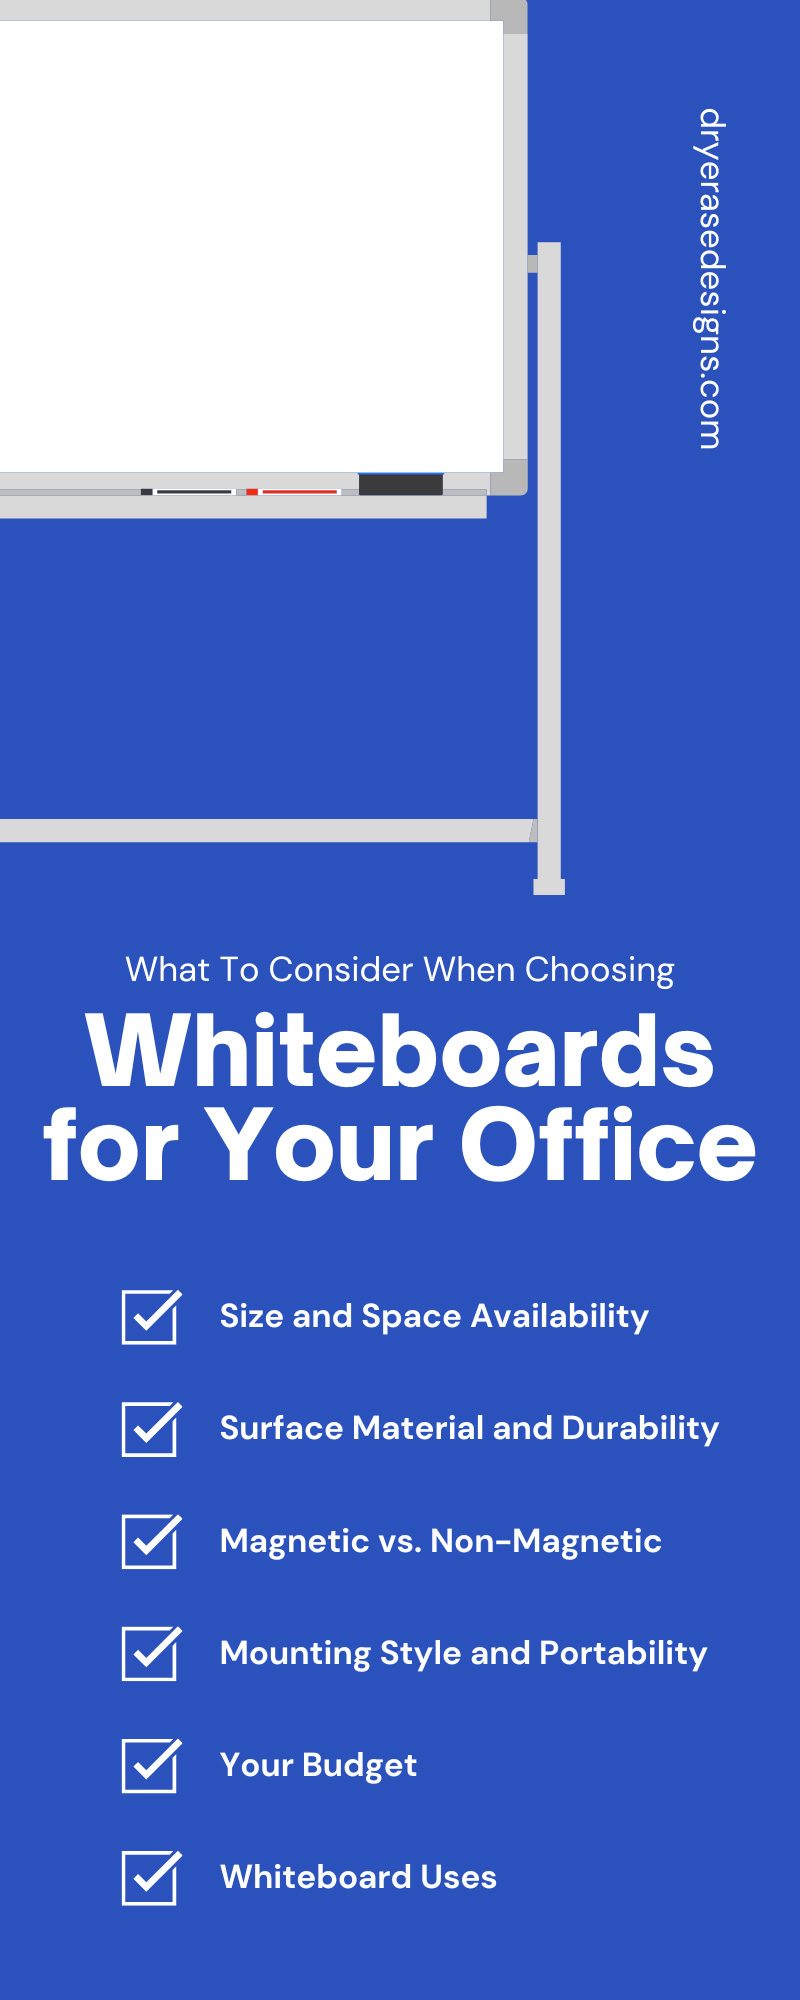 What To Consider When Choosing Whiteboards for Your Office